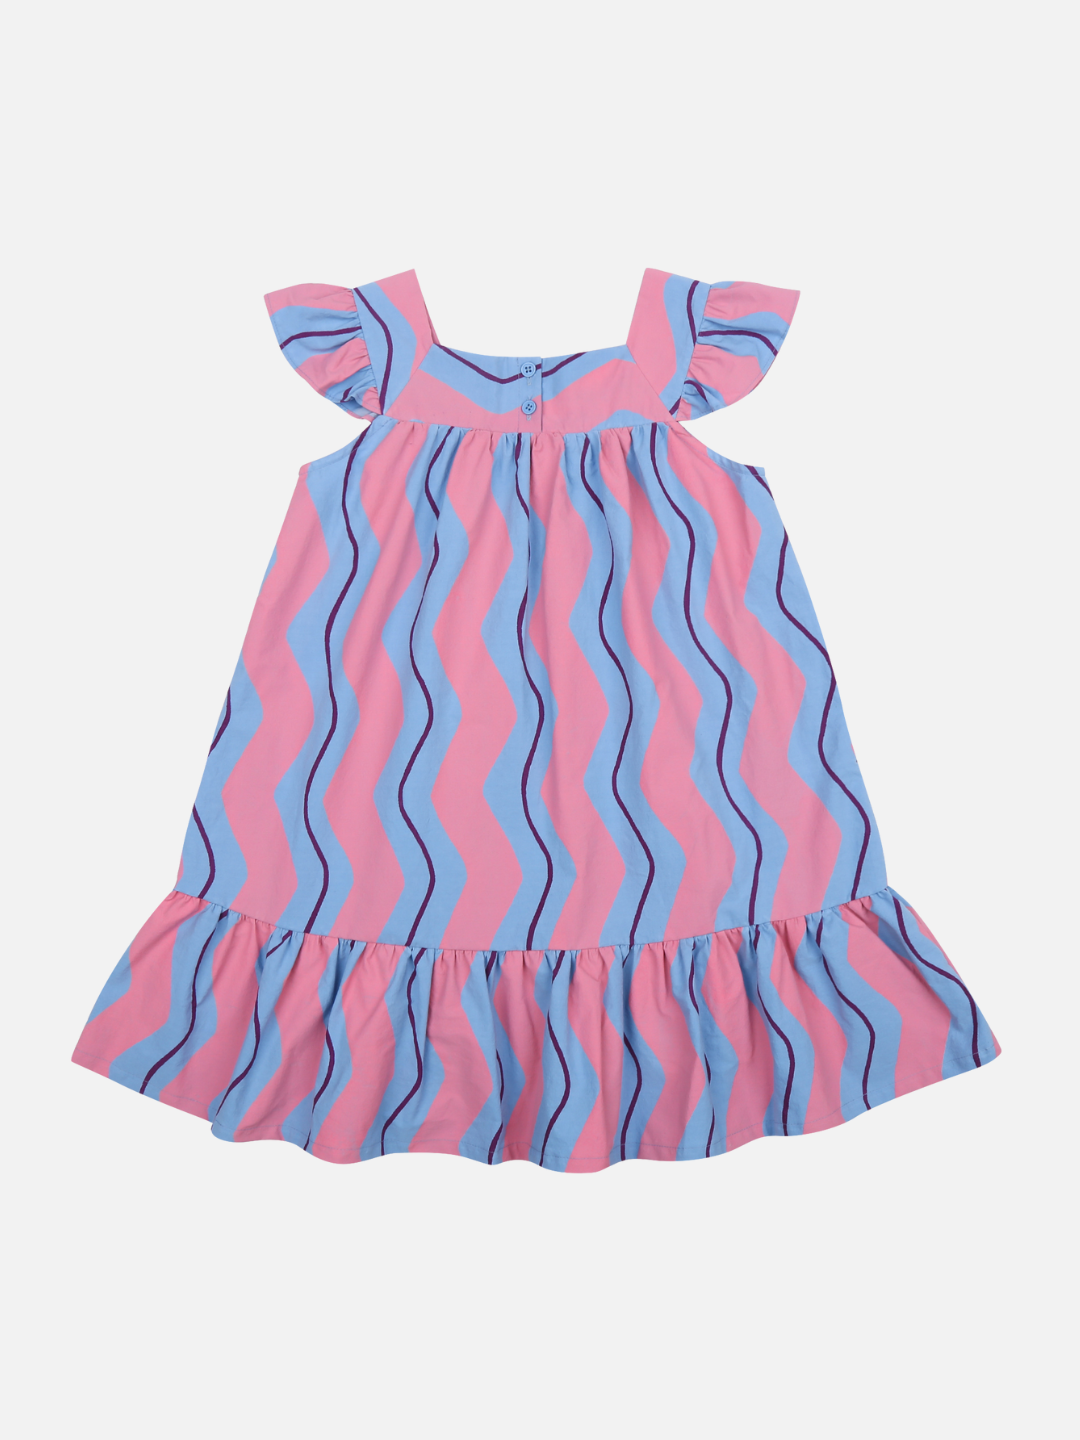 Back of Wave Stripe Dress. Wide pink vertical squiggly stripes and thin purple vertical squiggly stripes on a light blue background. Ruffled hem and ruffled cap sleeve. Buttons on collar.